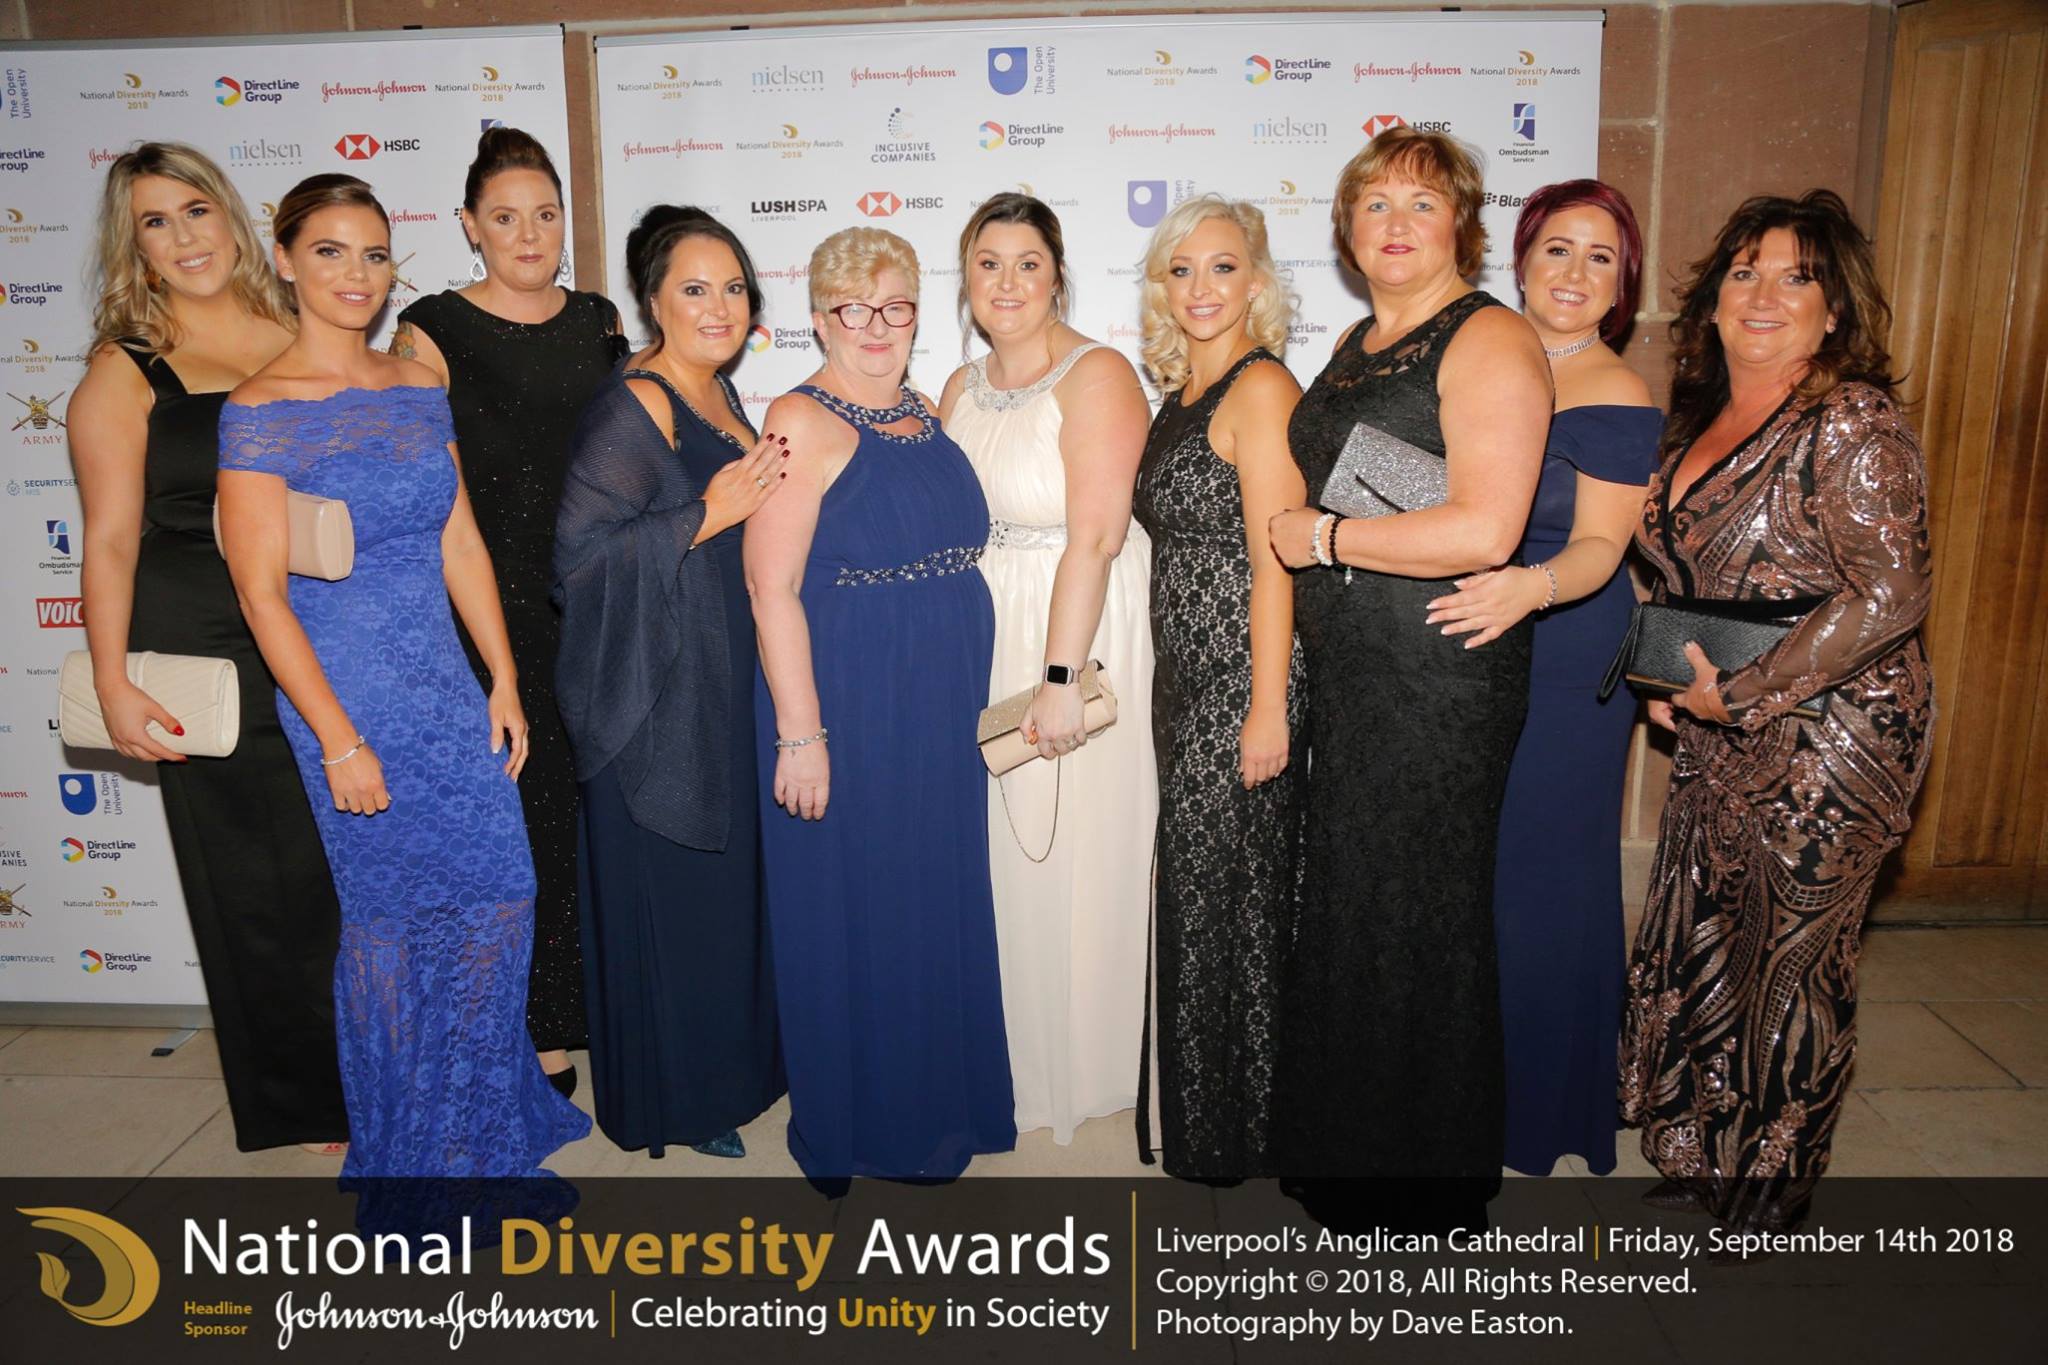 We just wanted to share the official National Diversity Awards photo from September awards ceremony where we were pleased to attend as finalists in the Disability Community Group from a total of 24,800 nominated persons, this is most of our wonderful office based Fightback team. In order we have Katie, Chloe, Danni, Mel, Sue, Amanda, Amy, Sarah, Hayley and Michelle (fightback founder)